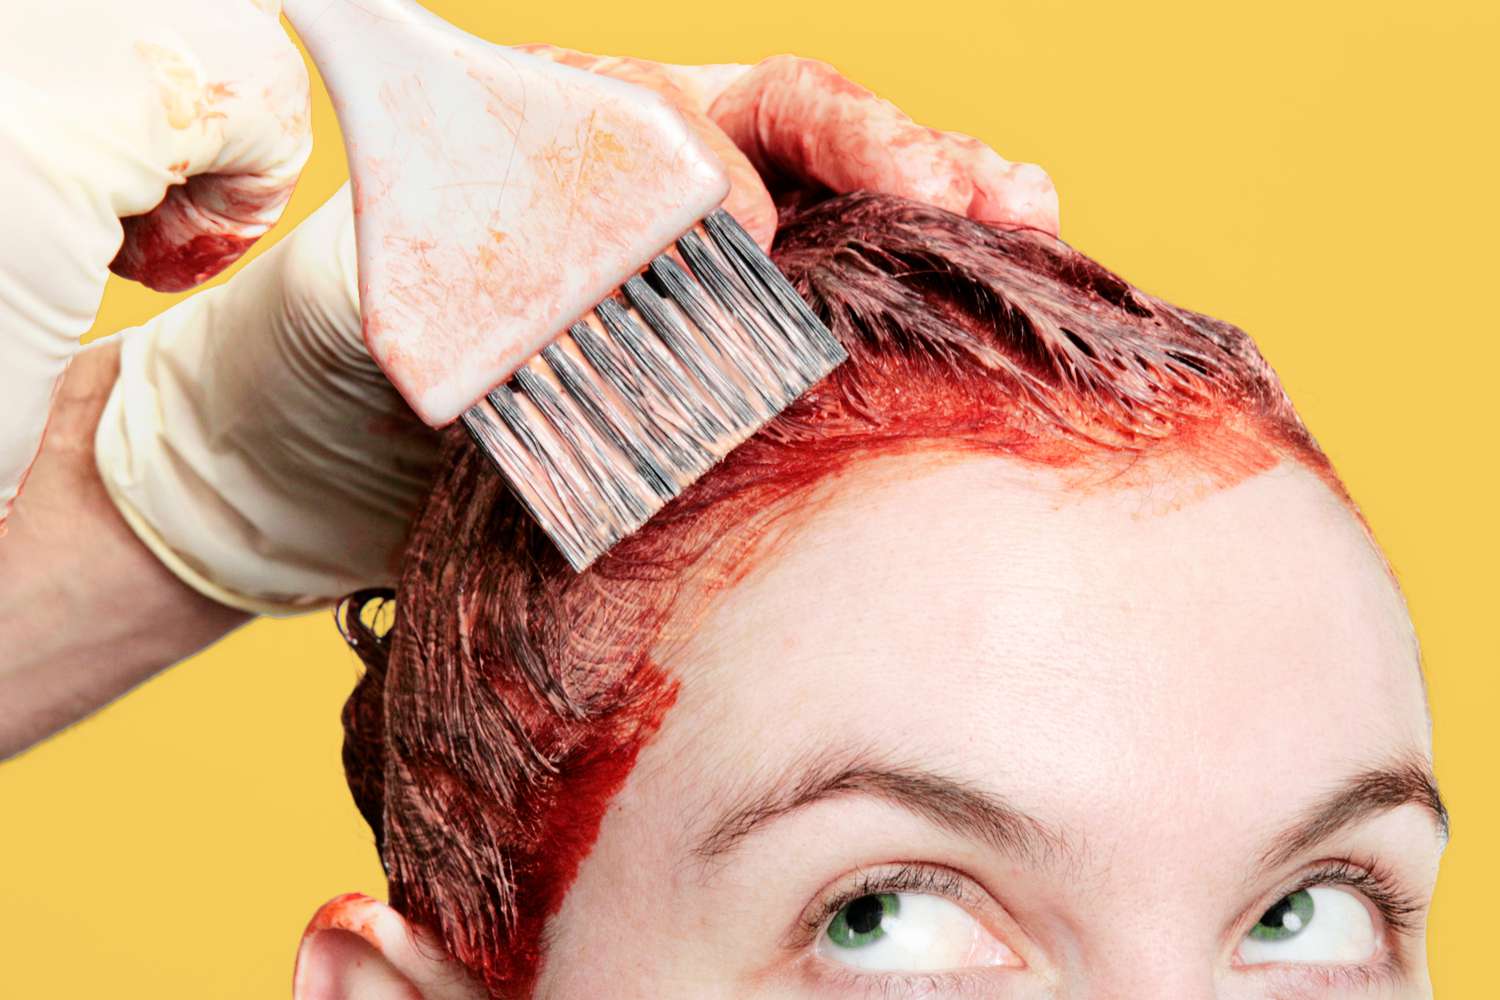 How To Get Hair Dye Off Skin